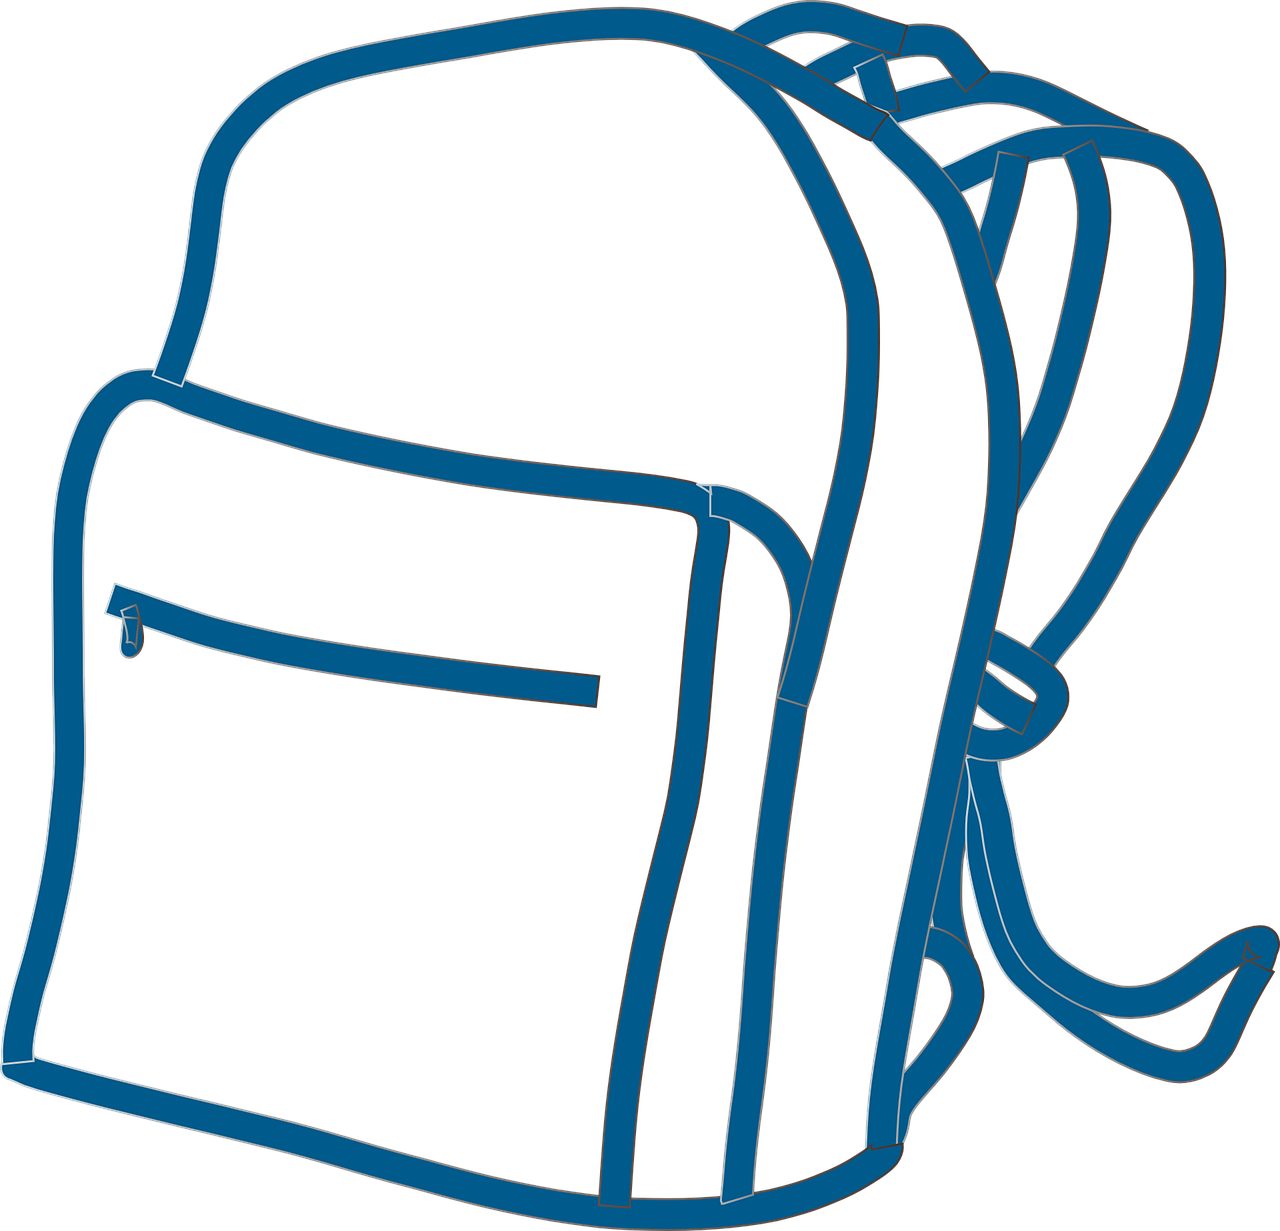 Backpack - Clipart - Transparent Background Backpack Clipart (1280x1231)